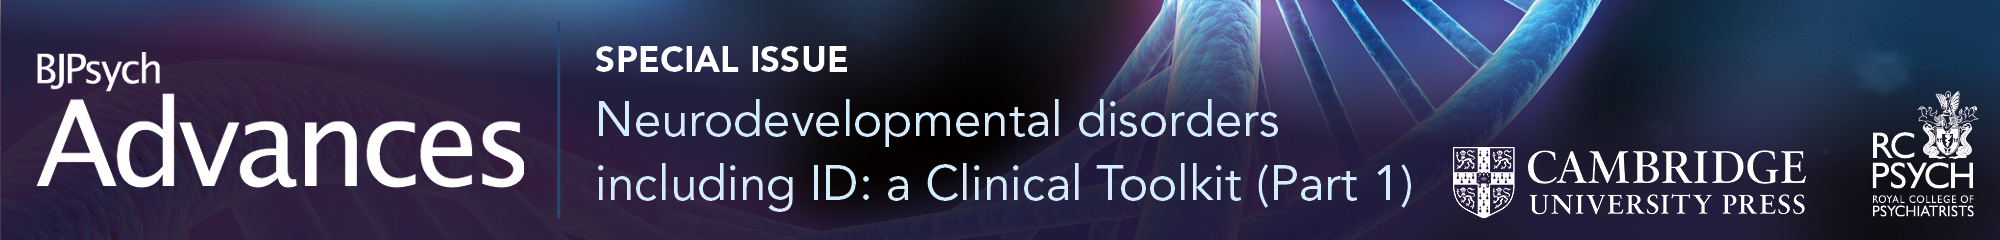 BJPsych Advances Special Issue Neurodevelopmental Disorders: a Clinical Toolkit